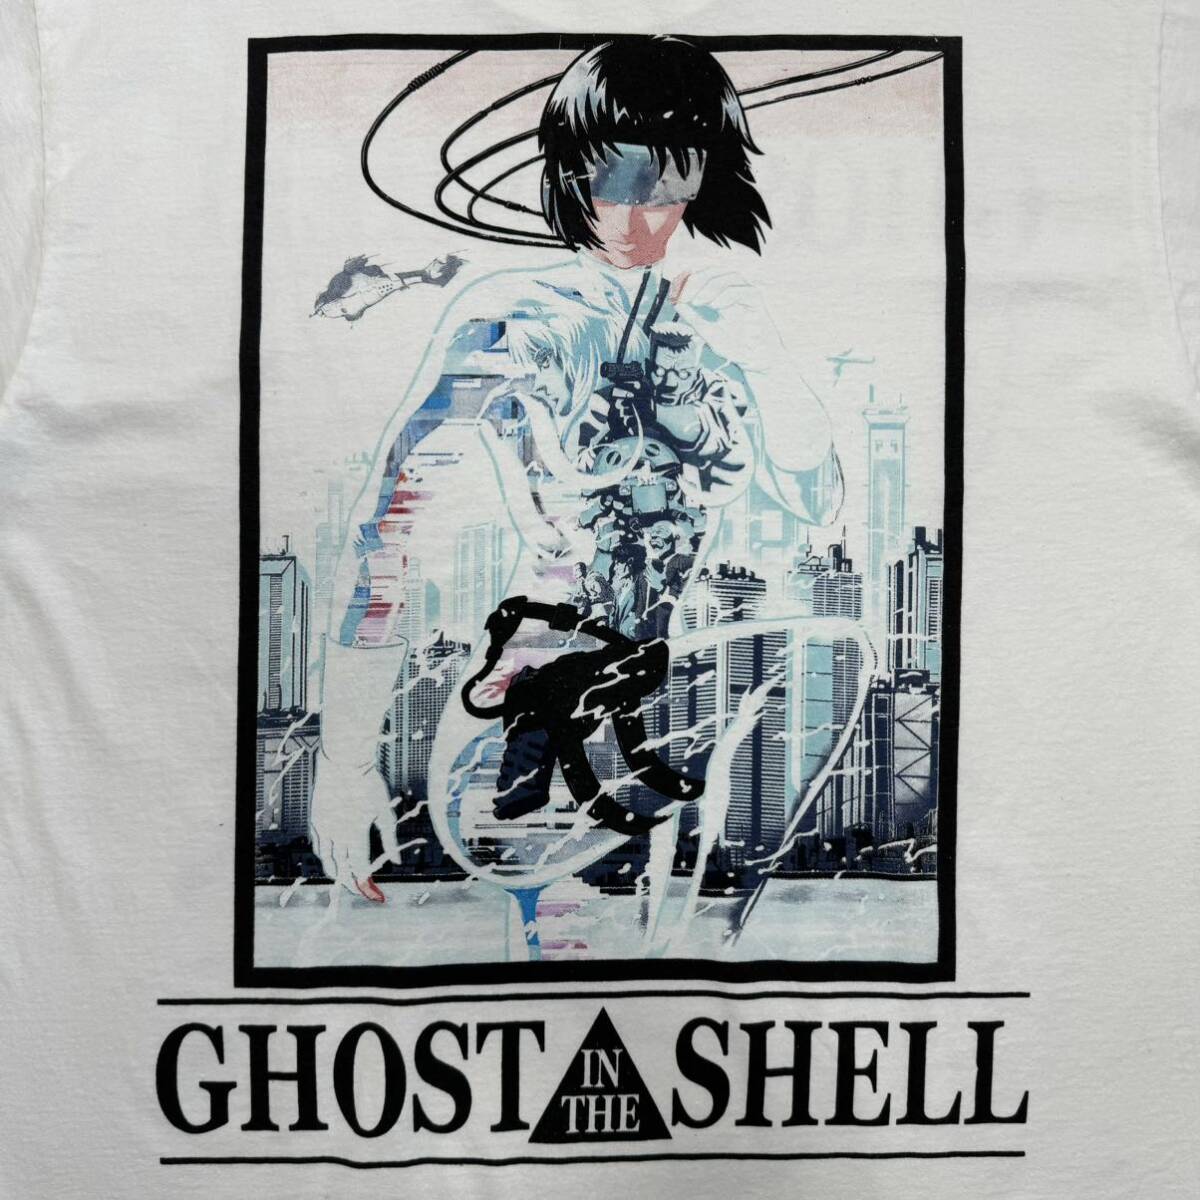 GHOST IN THE SHELL 攻殻機動隊 Tシャツ teeの画像6